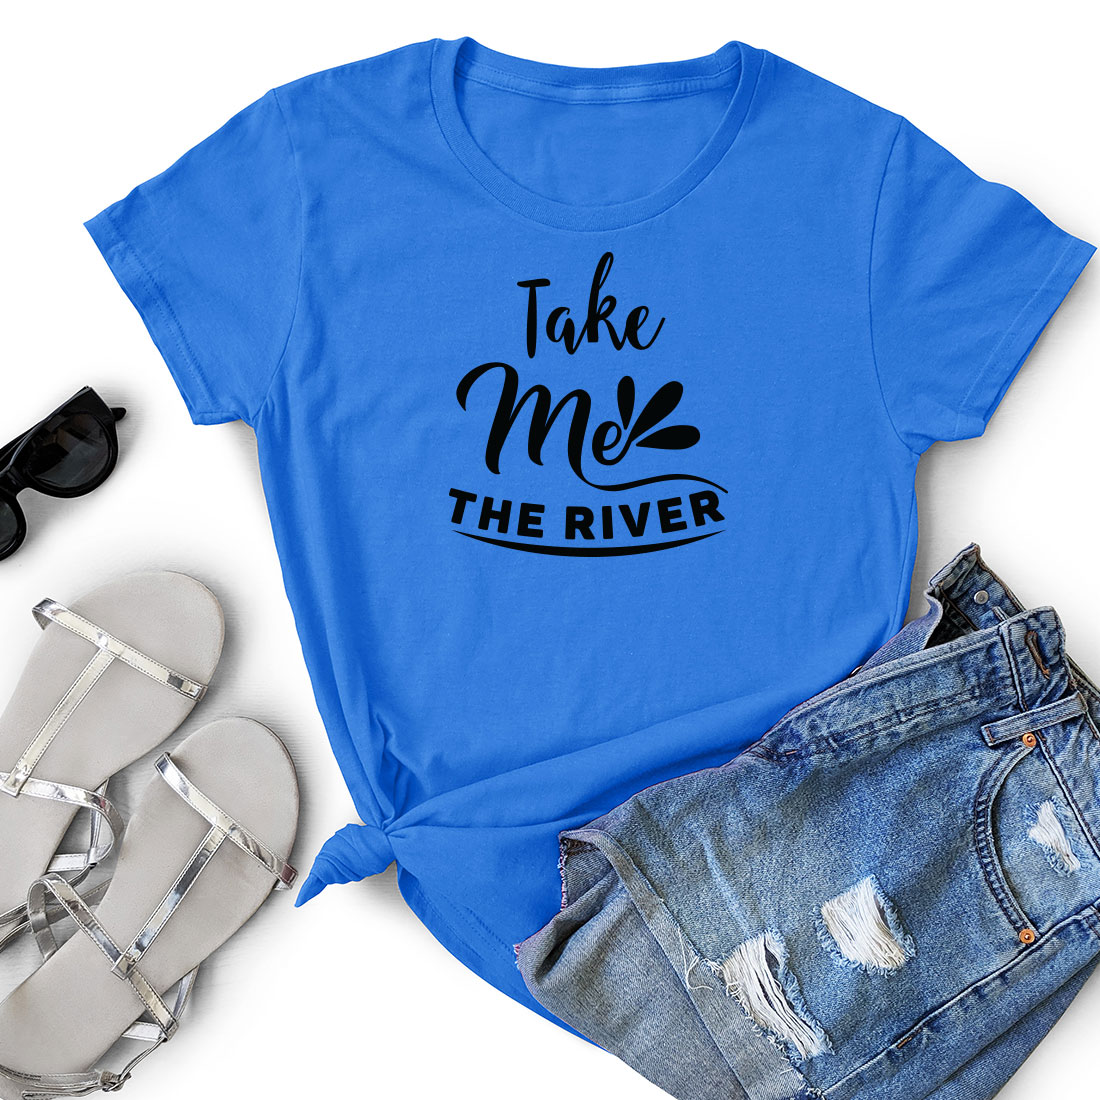 T - shirt that says take me the river next to a pair of shorts.